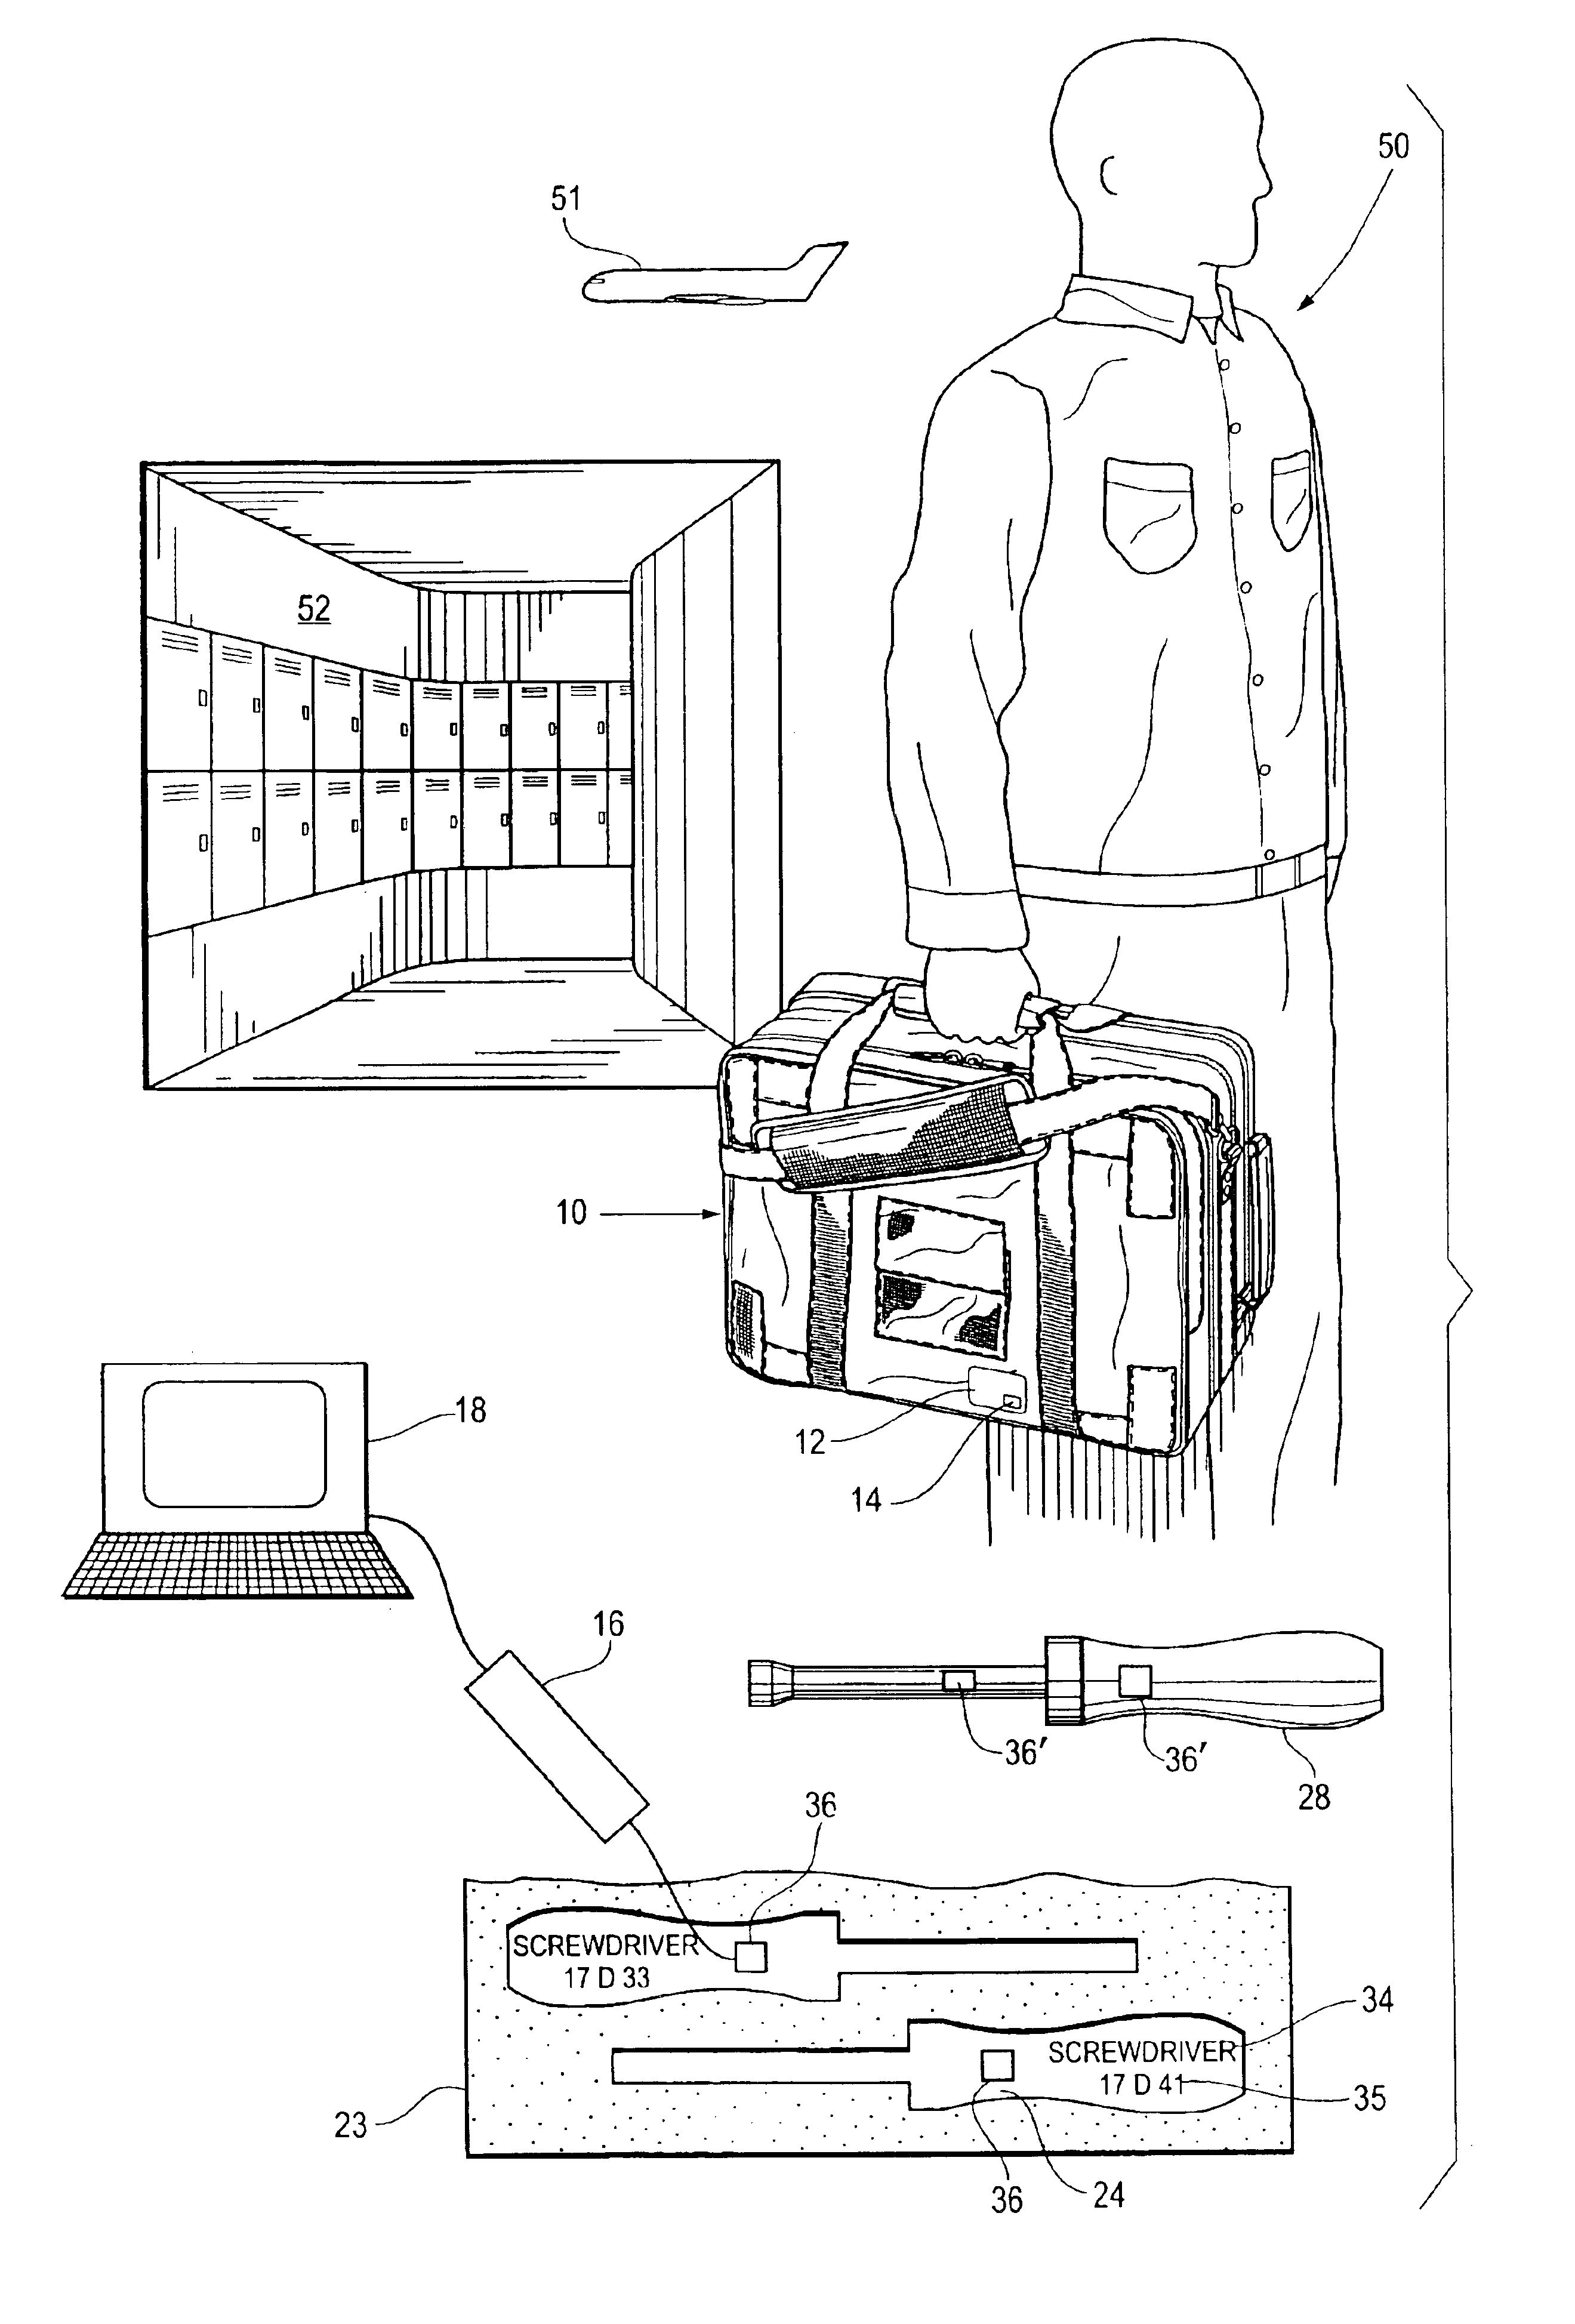 Method of tracking tools